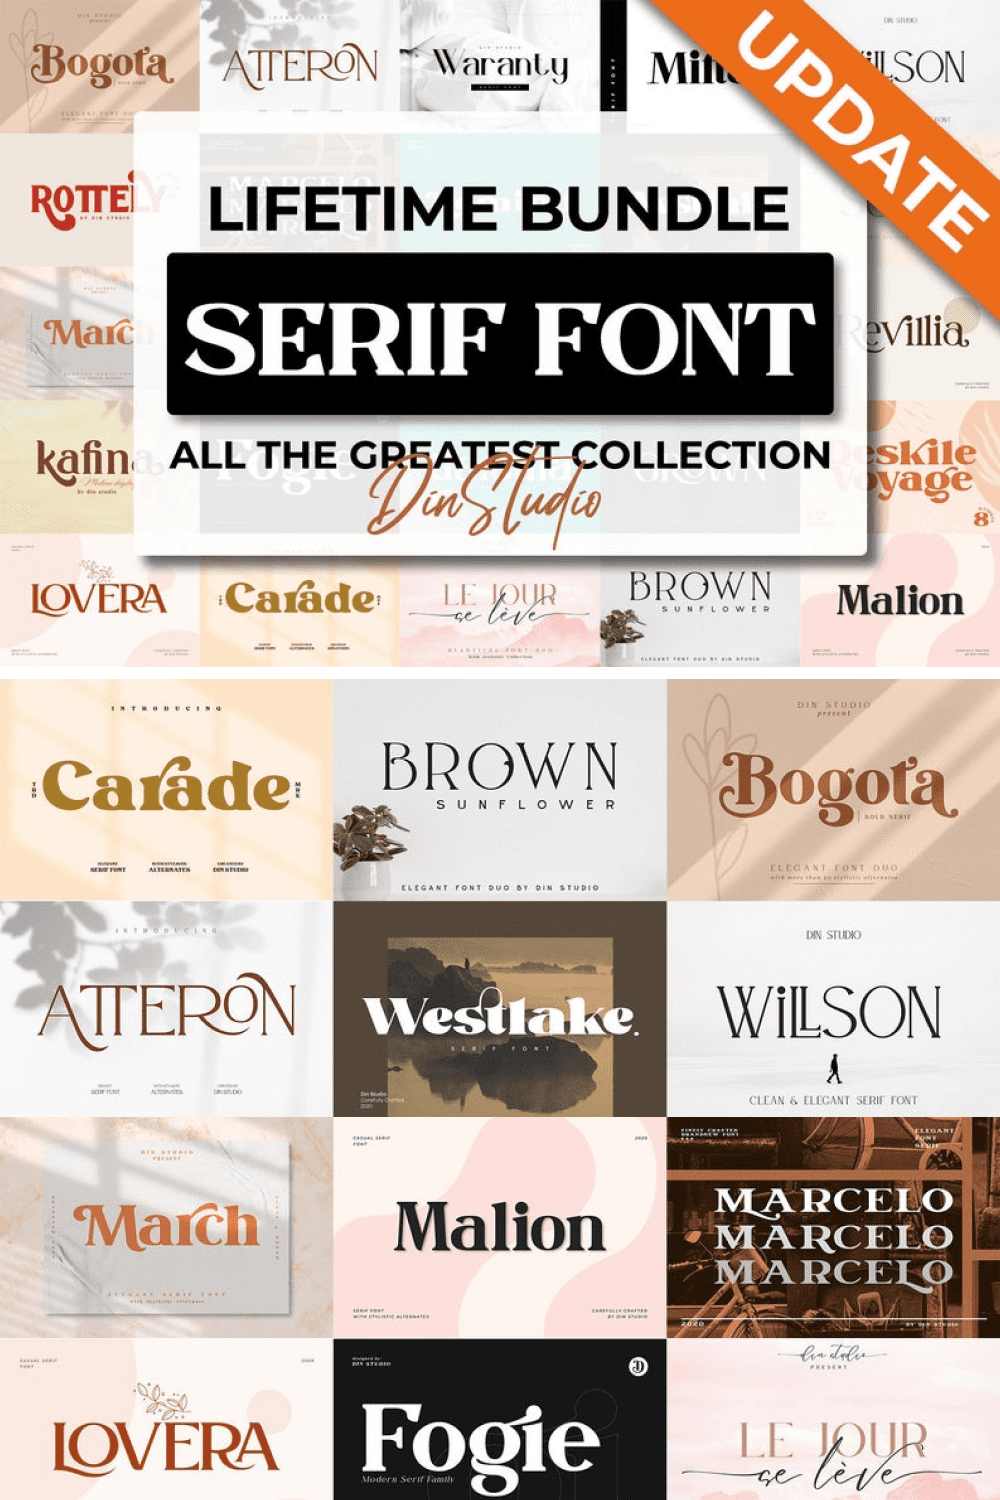 This is a large collection of stylish fonts in different styles.